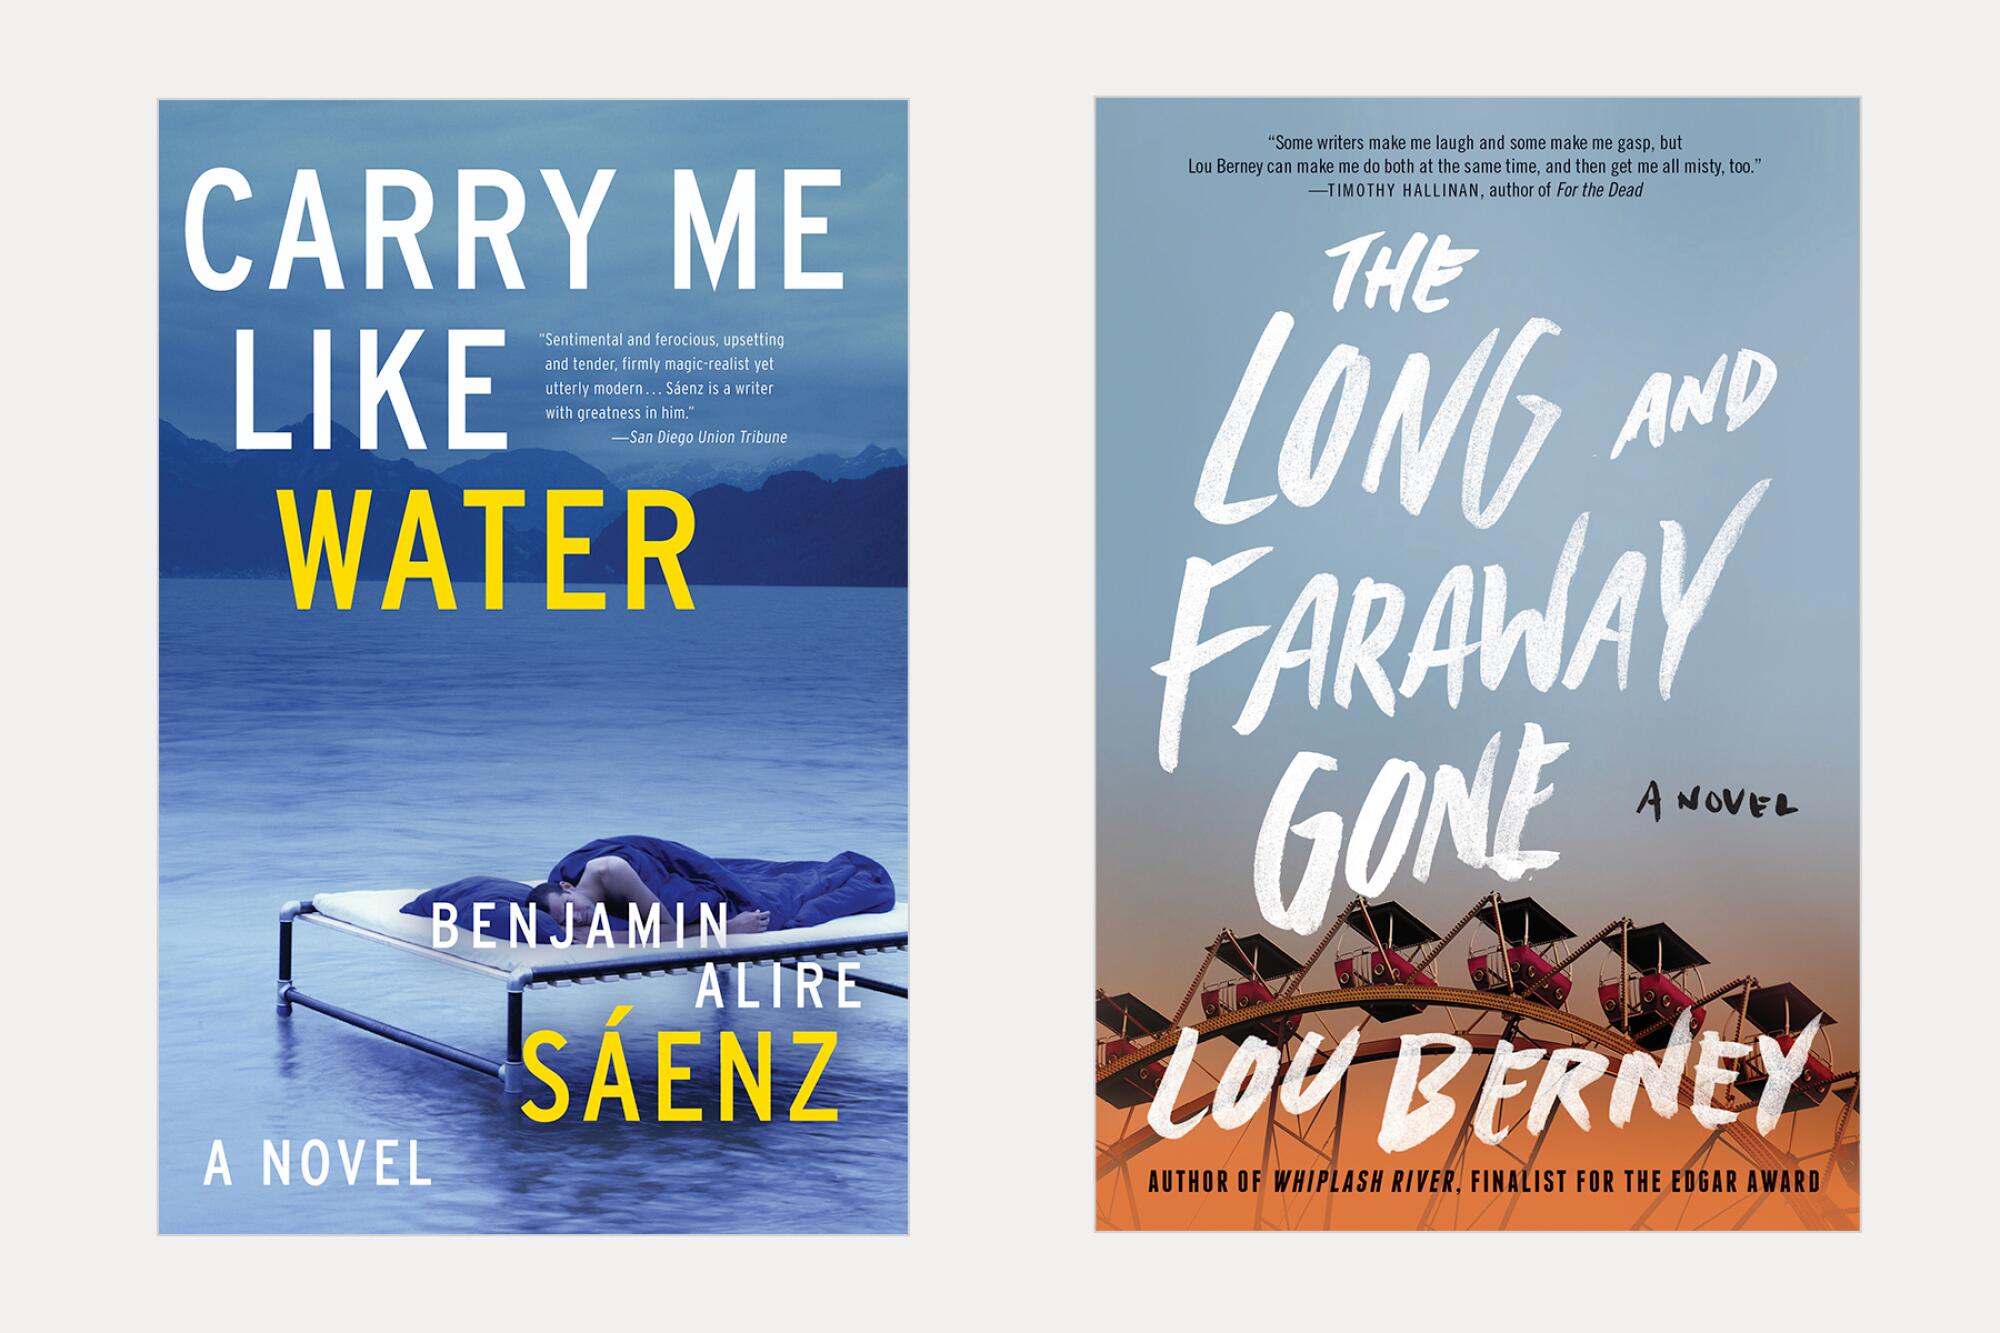 two book covers: Carry Me Like Water by Benjamin Alire Sáenz and The Long and Faraway Gone by Lou Berney